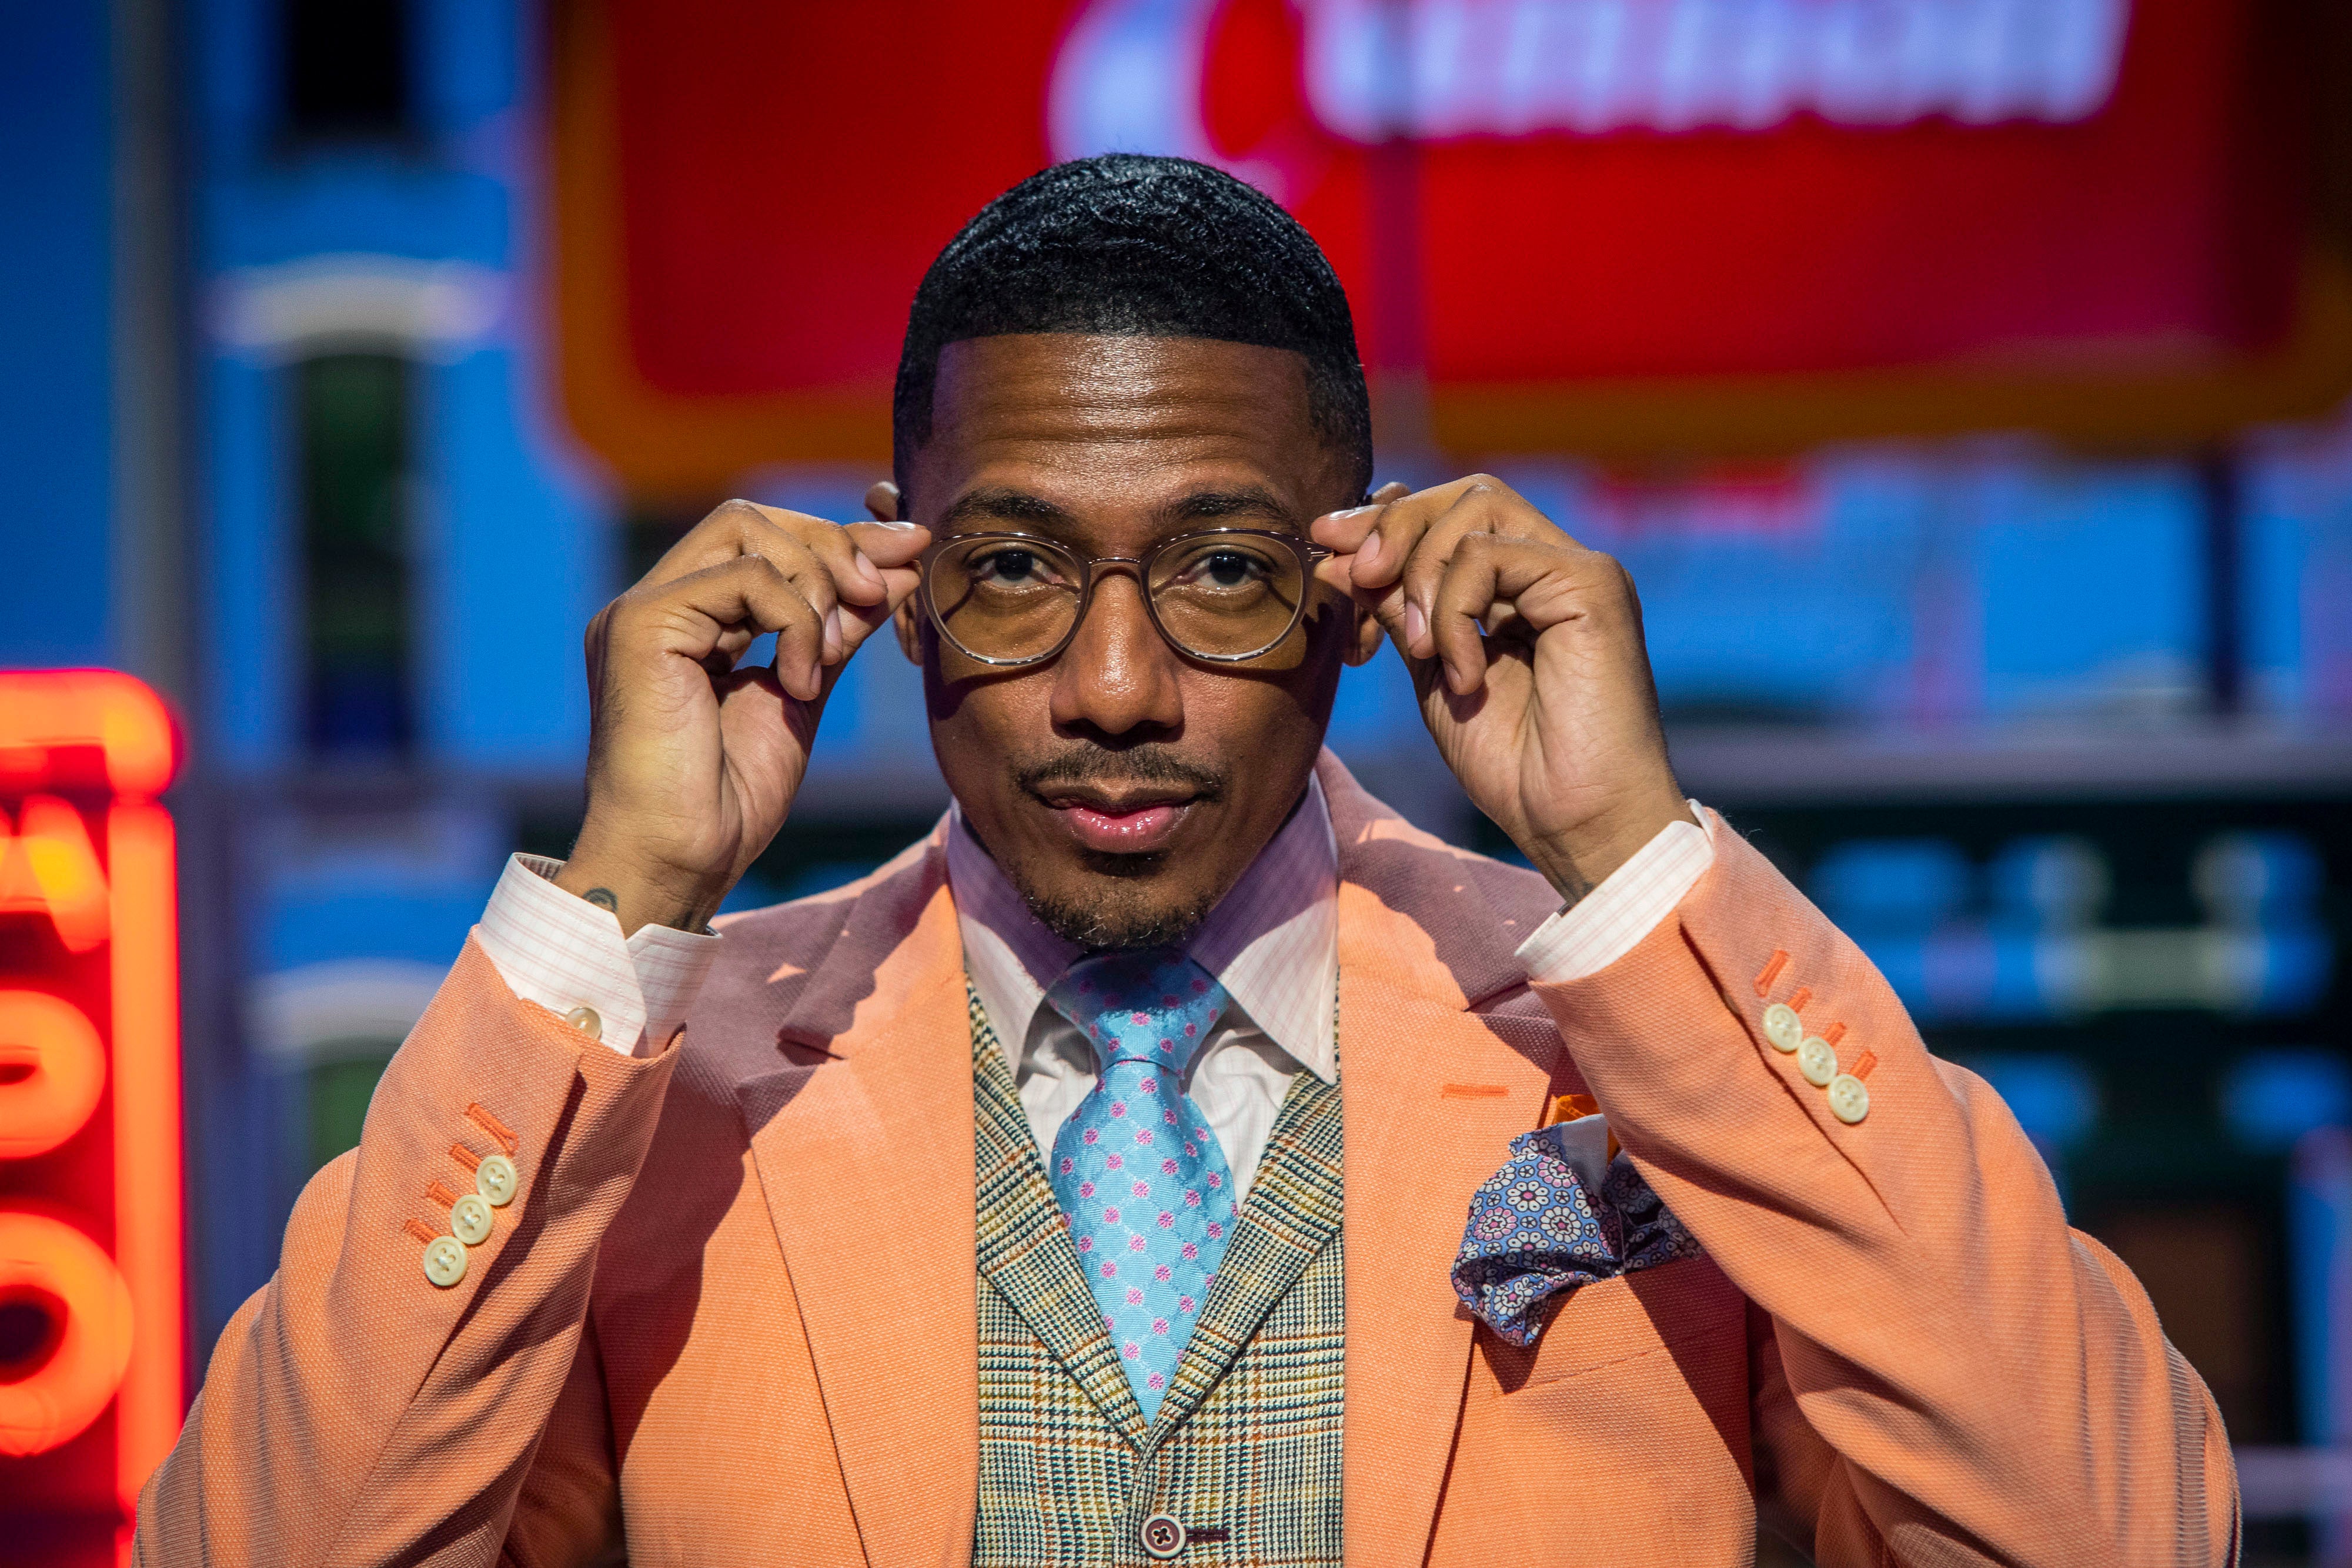 Q&A Nick Cannon on talk show, backlash last year The